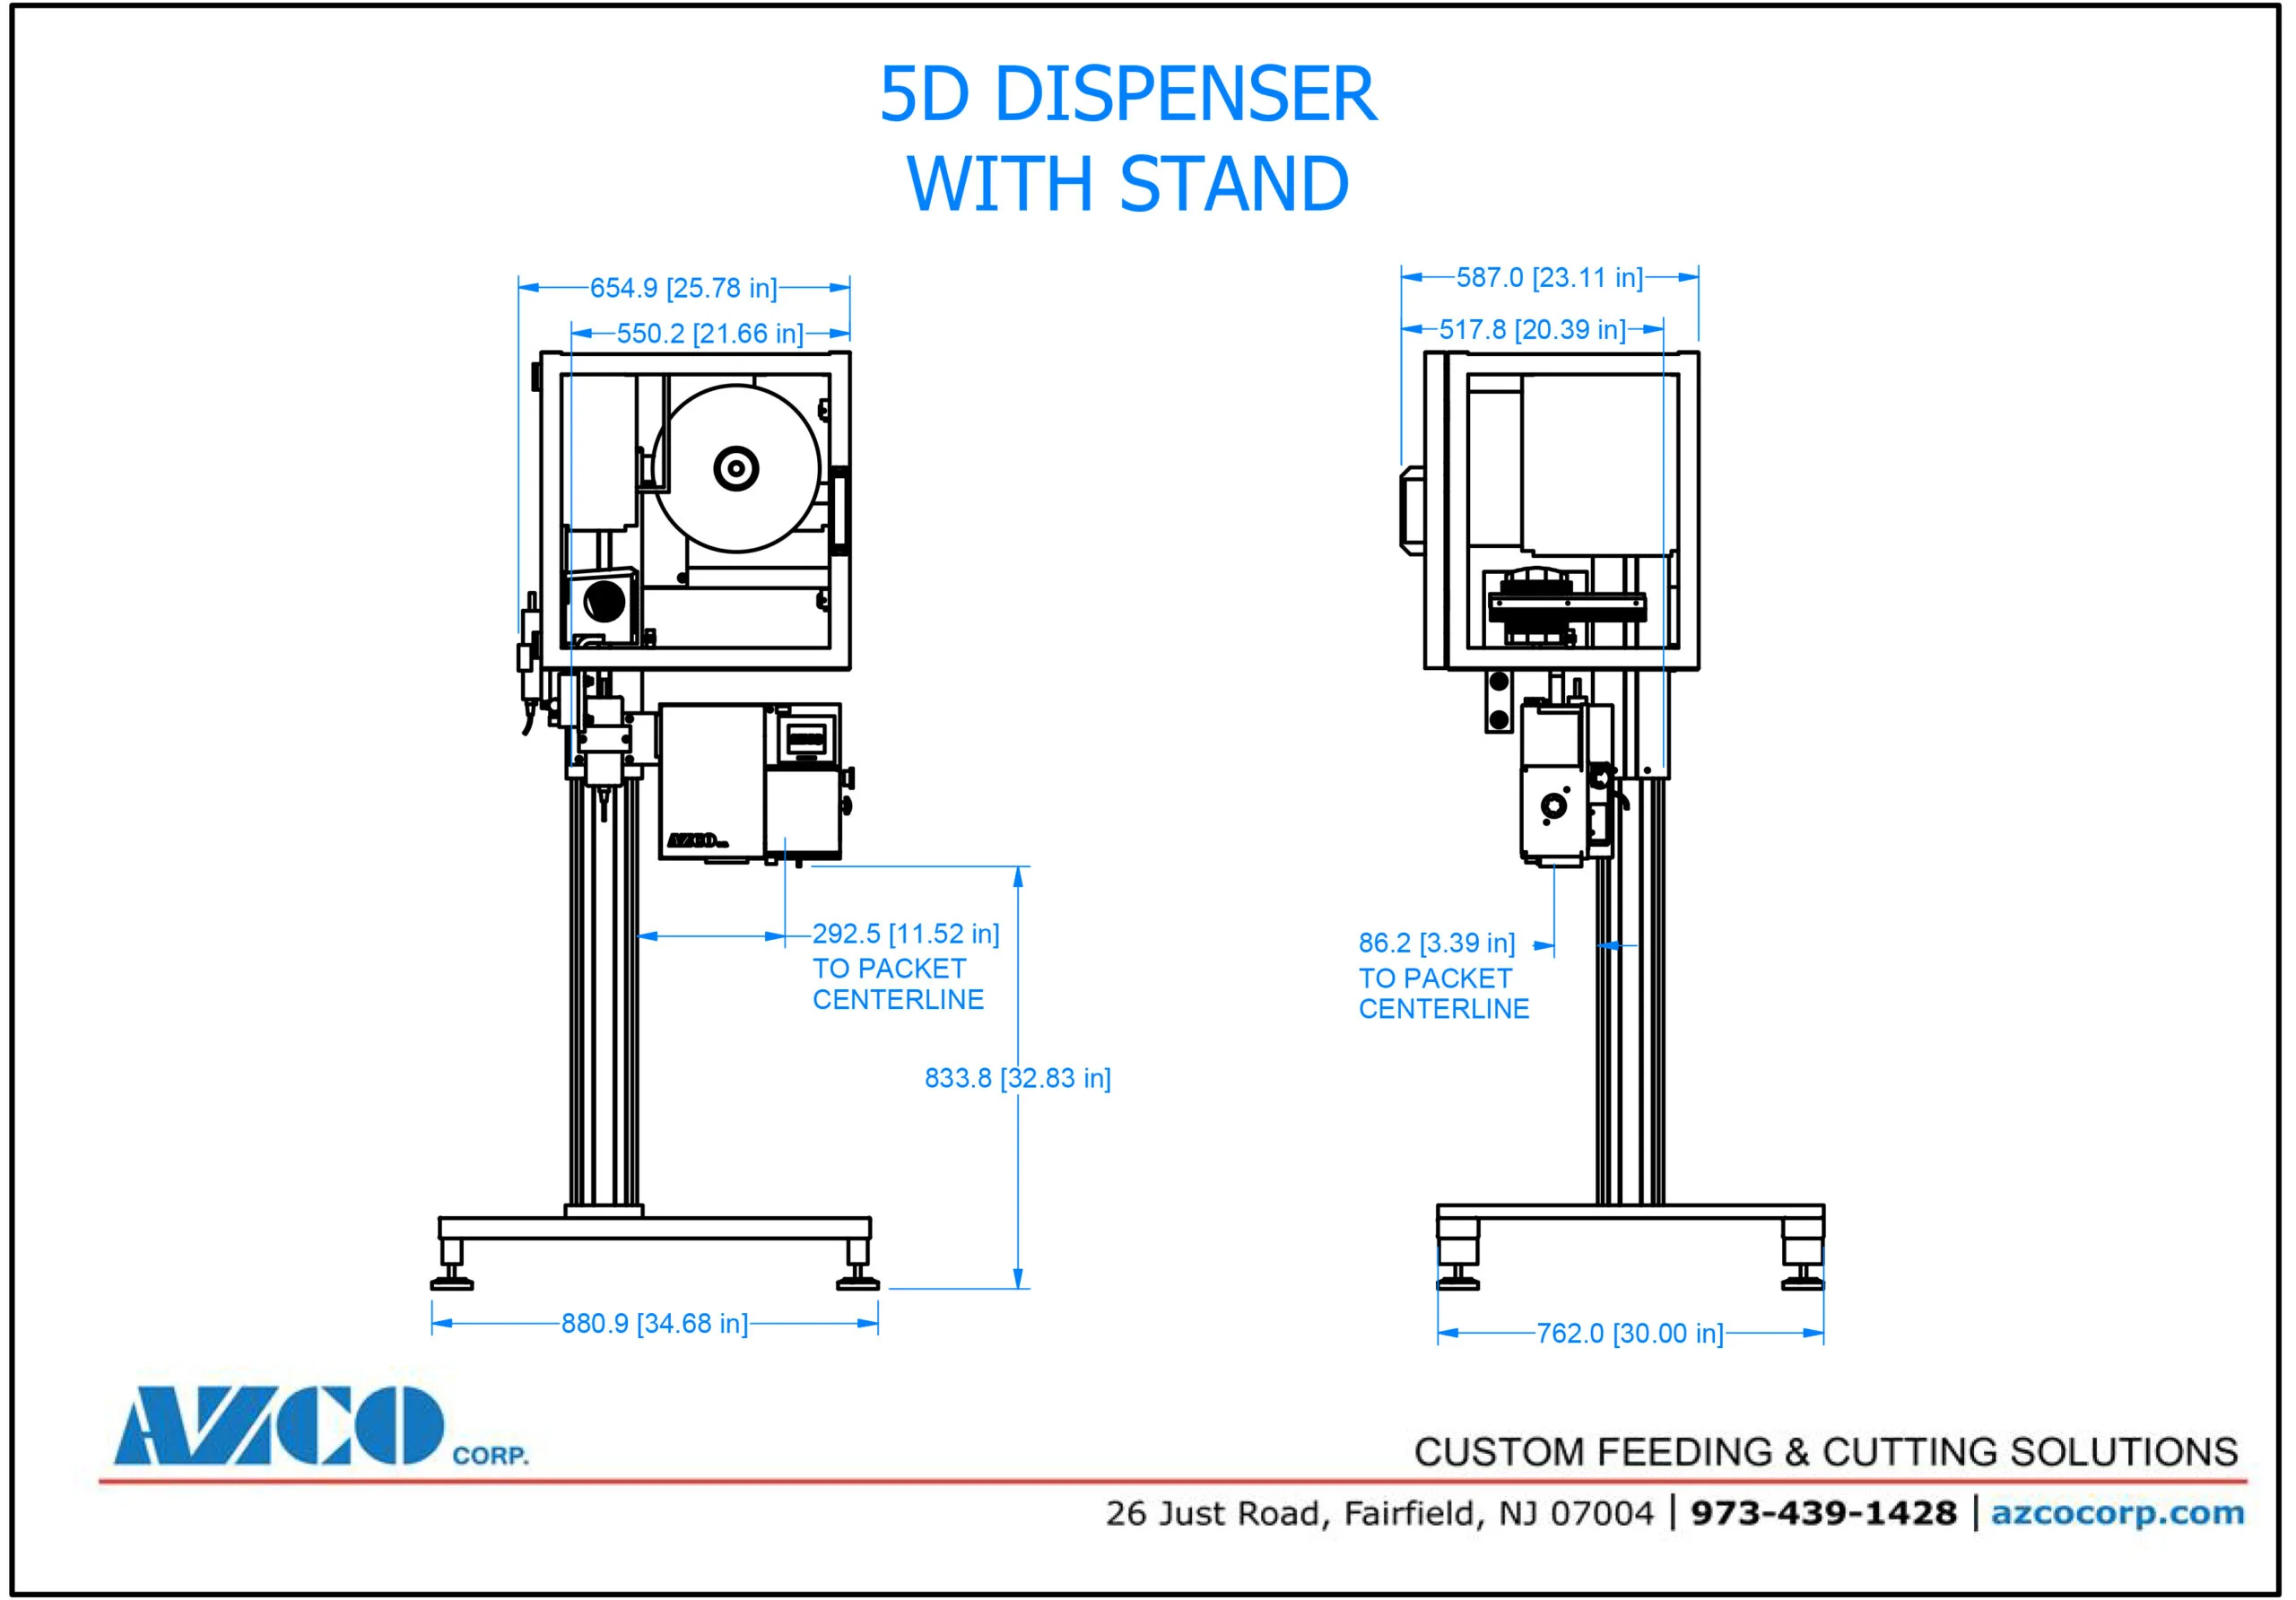 5D Dispenser with Stand